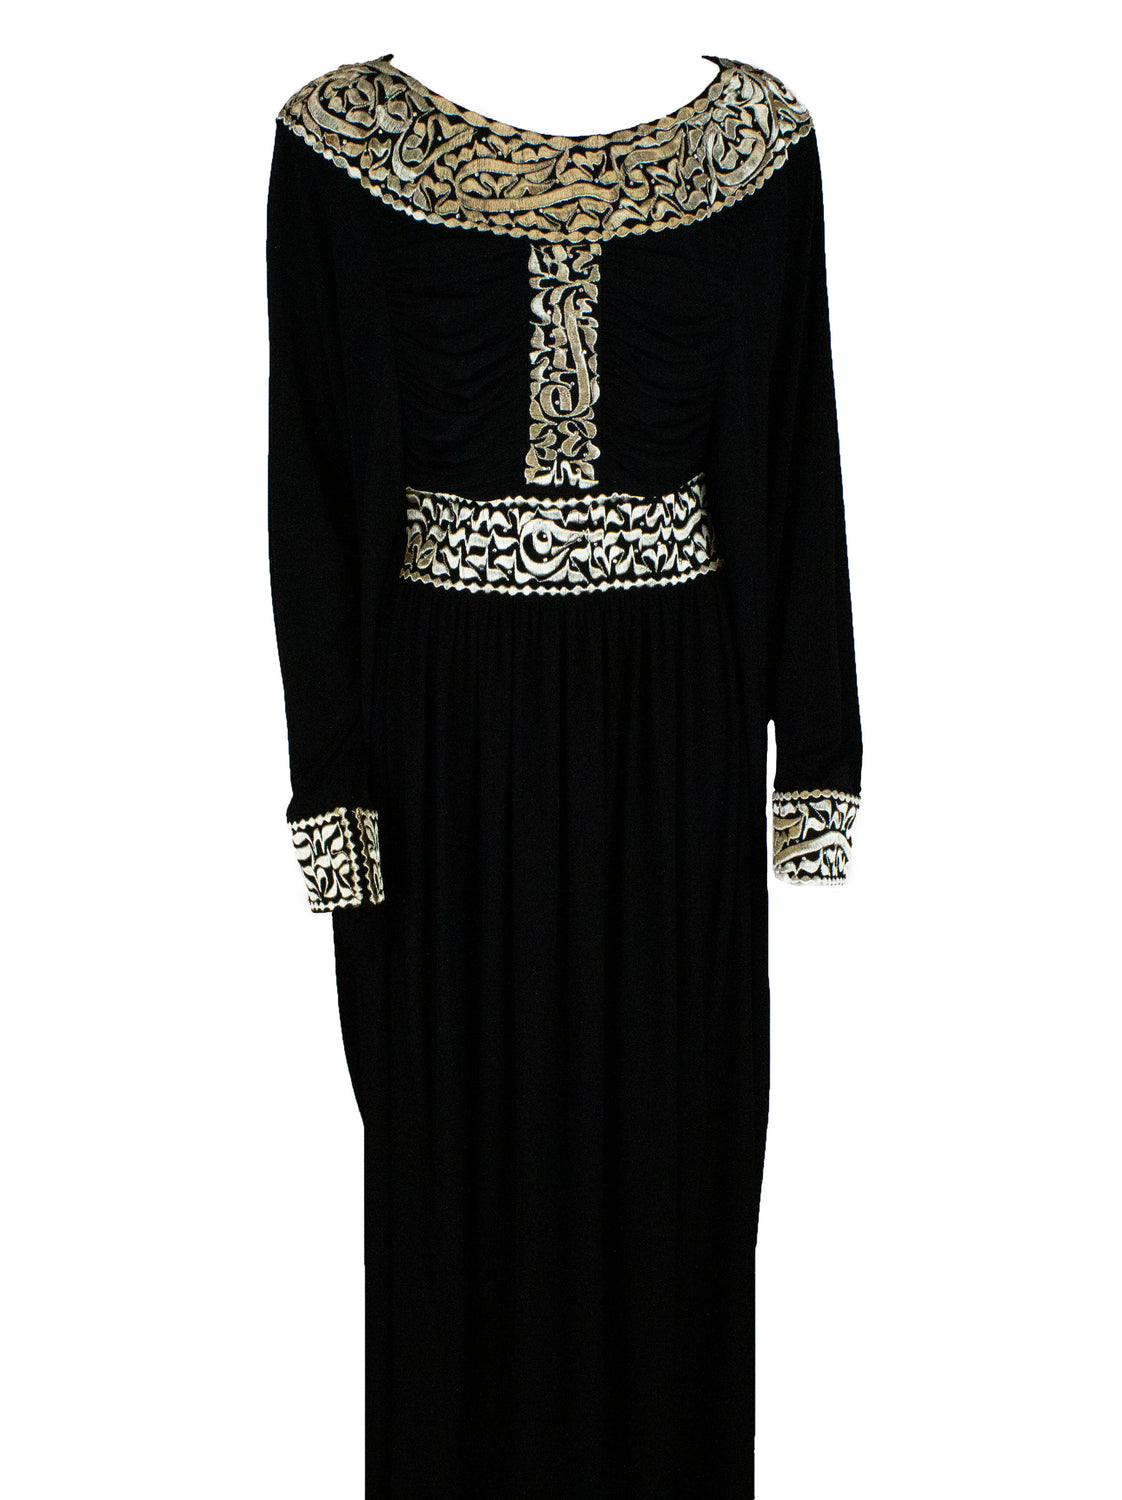 All black abaya embroidered with gold Arabic calligraphy along the neckline, waistline, sleeves, and down the chest.